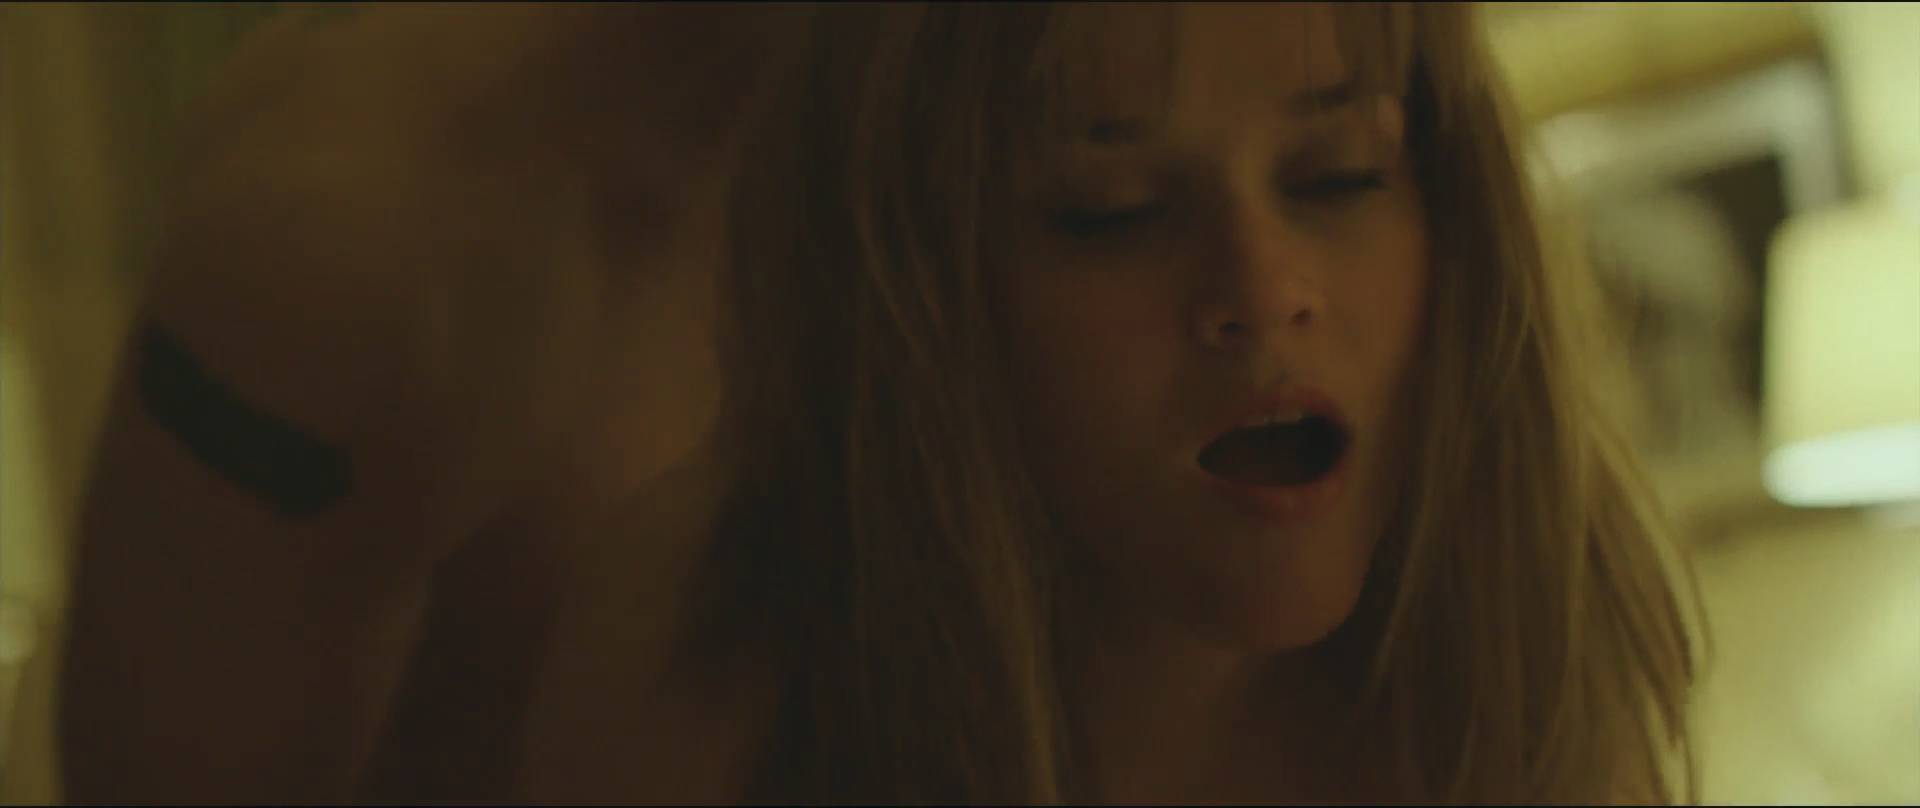 Reese Witherspoon - Wild (2014) "Topless/SEX" Scene HD 1080p. 